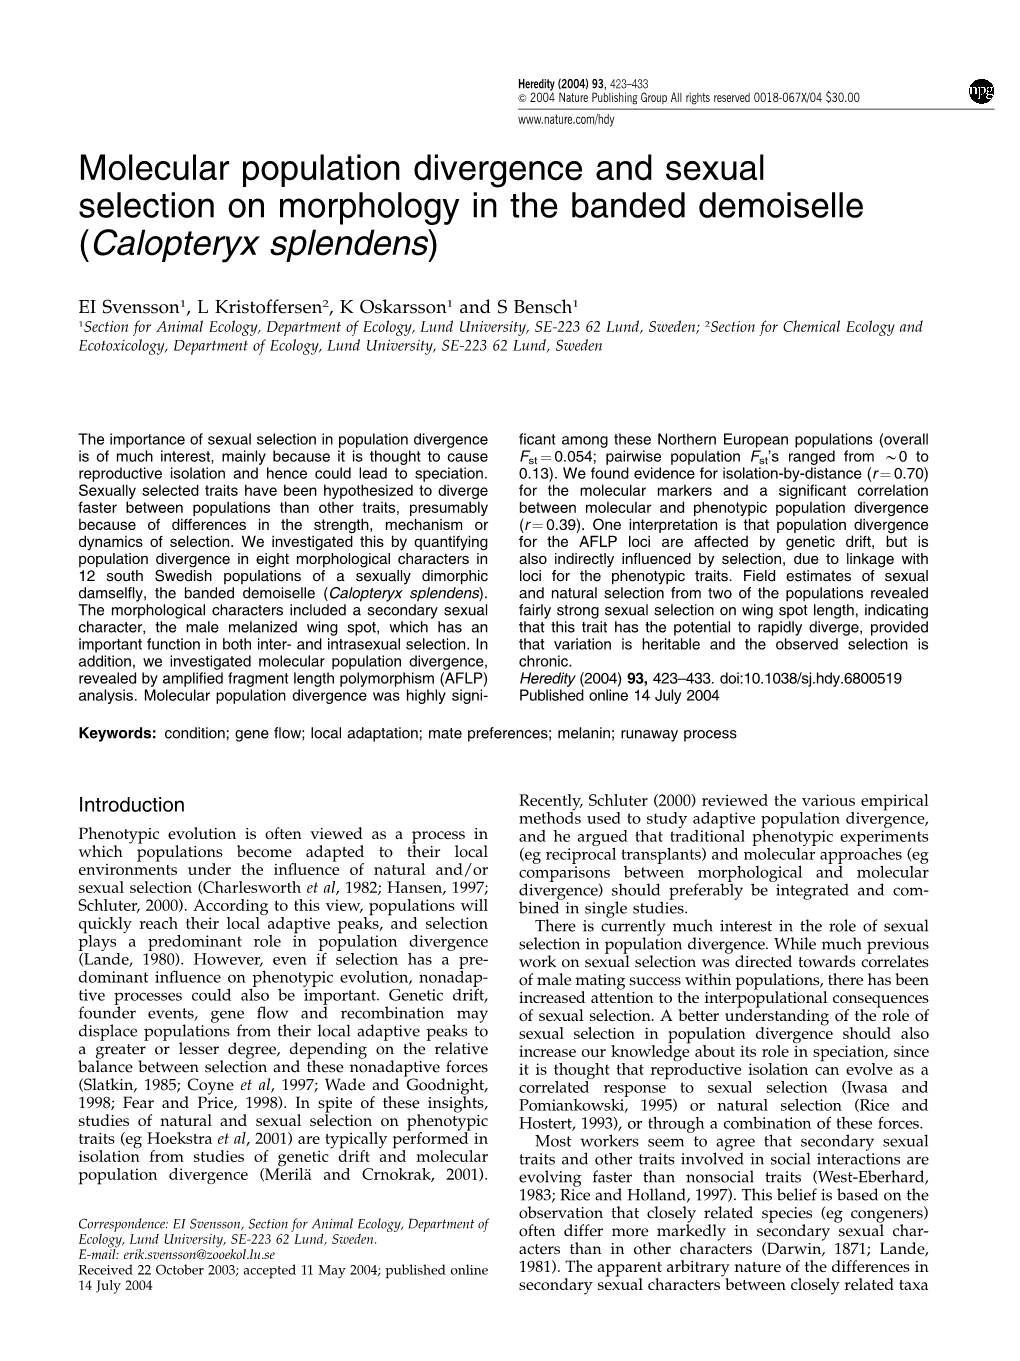 Molecular Population Divergence and Sexual Selection on Morphology in the Banded Demoiselle (Calopteryx Splendens)